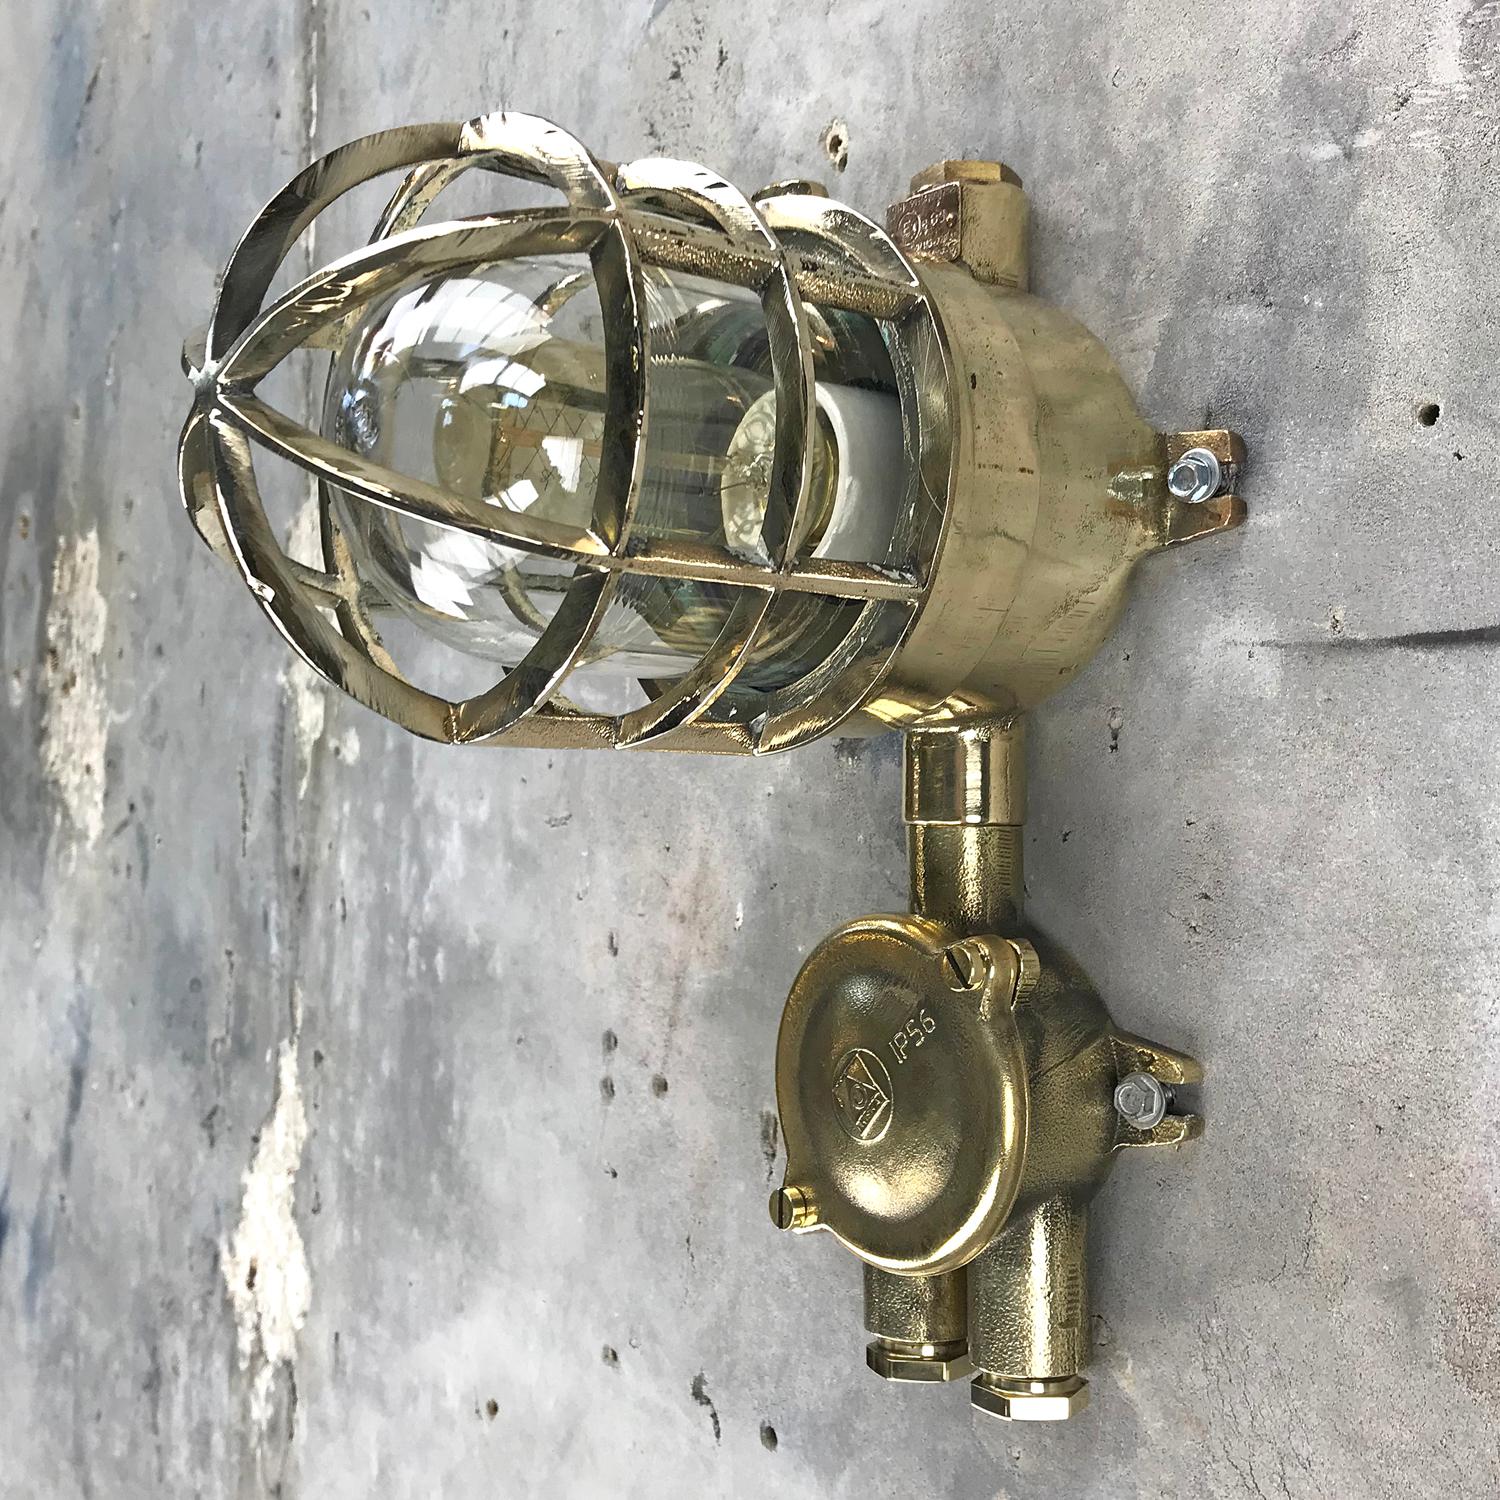 1970s German Explosion Proof Wall Light Cast Brass, Glass Shade and Junction Box 6